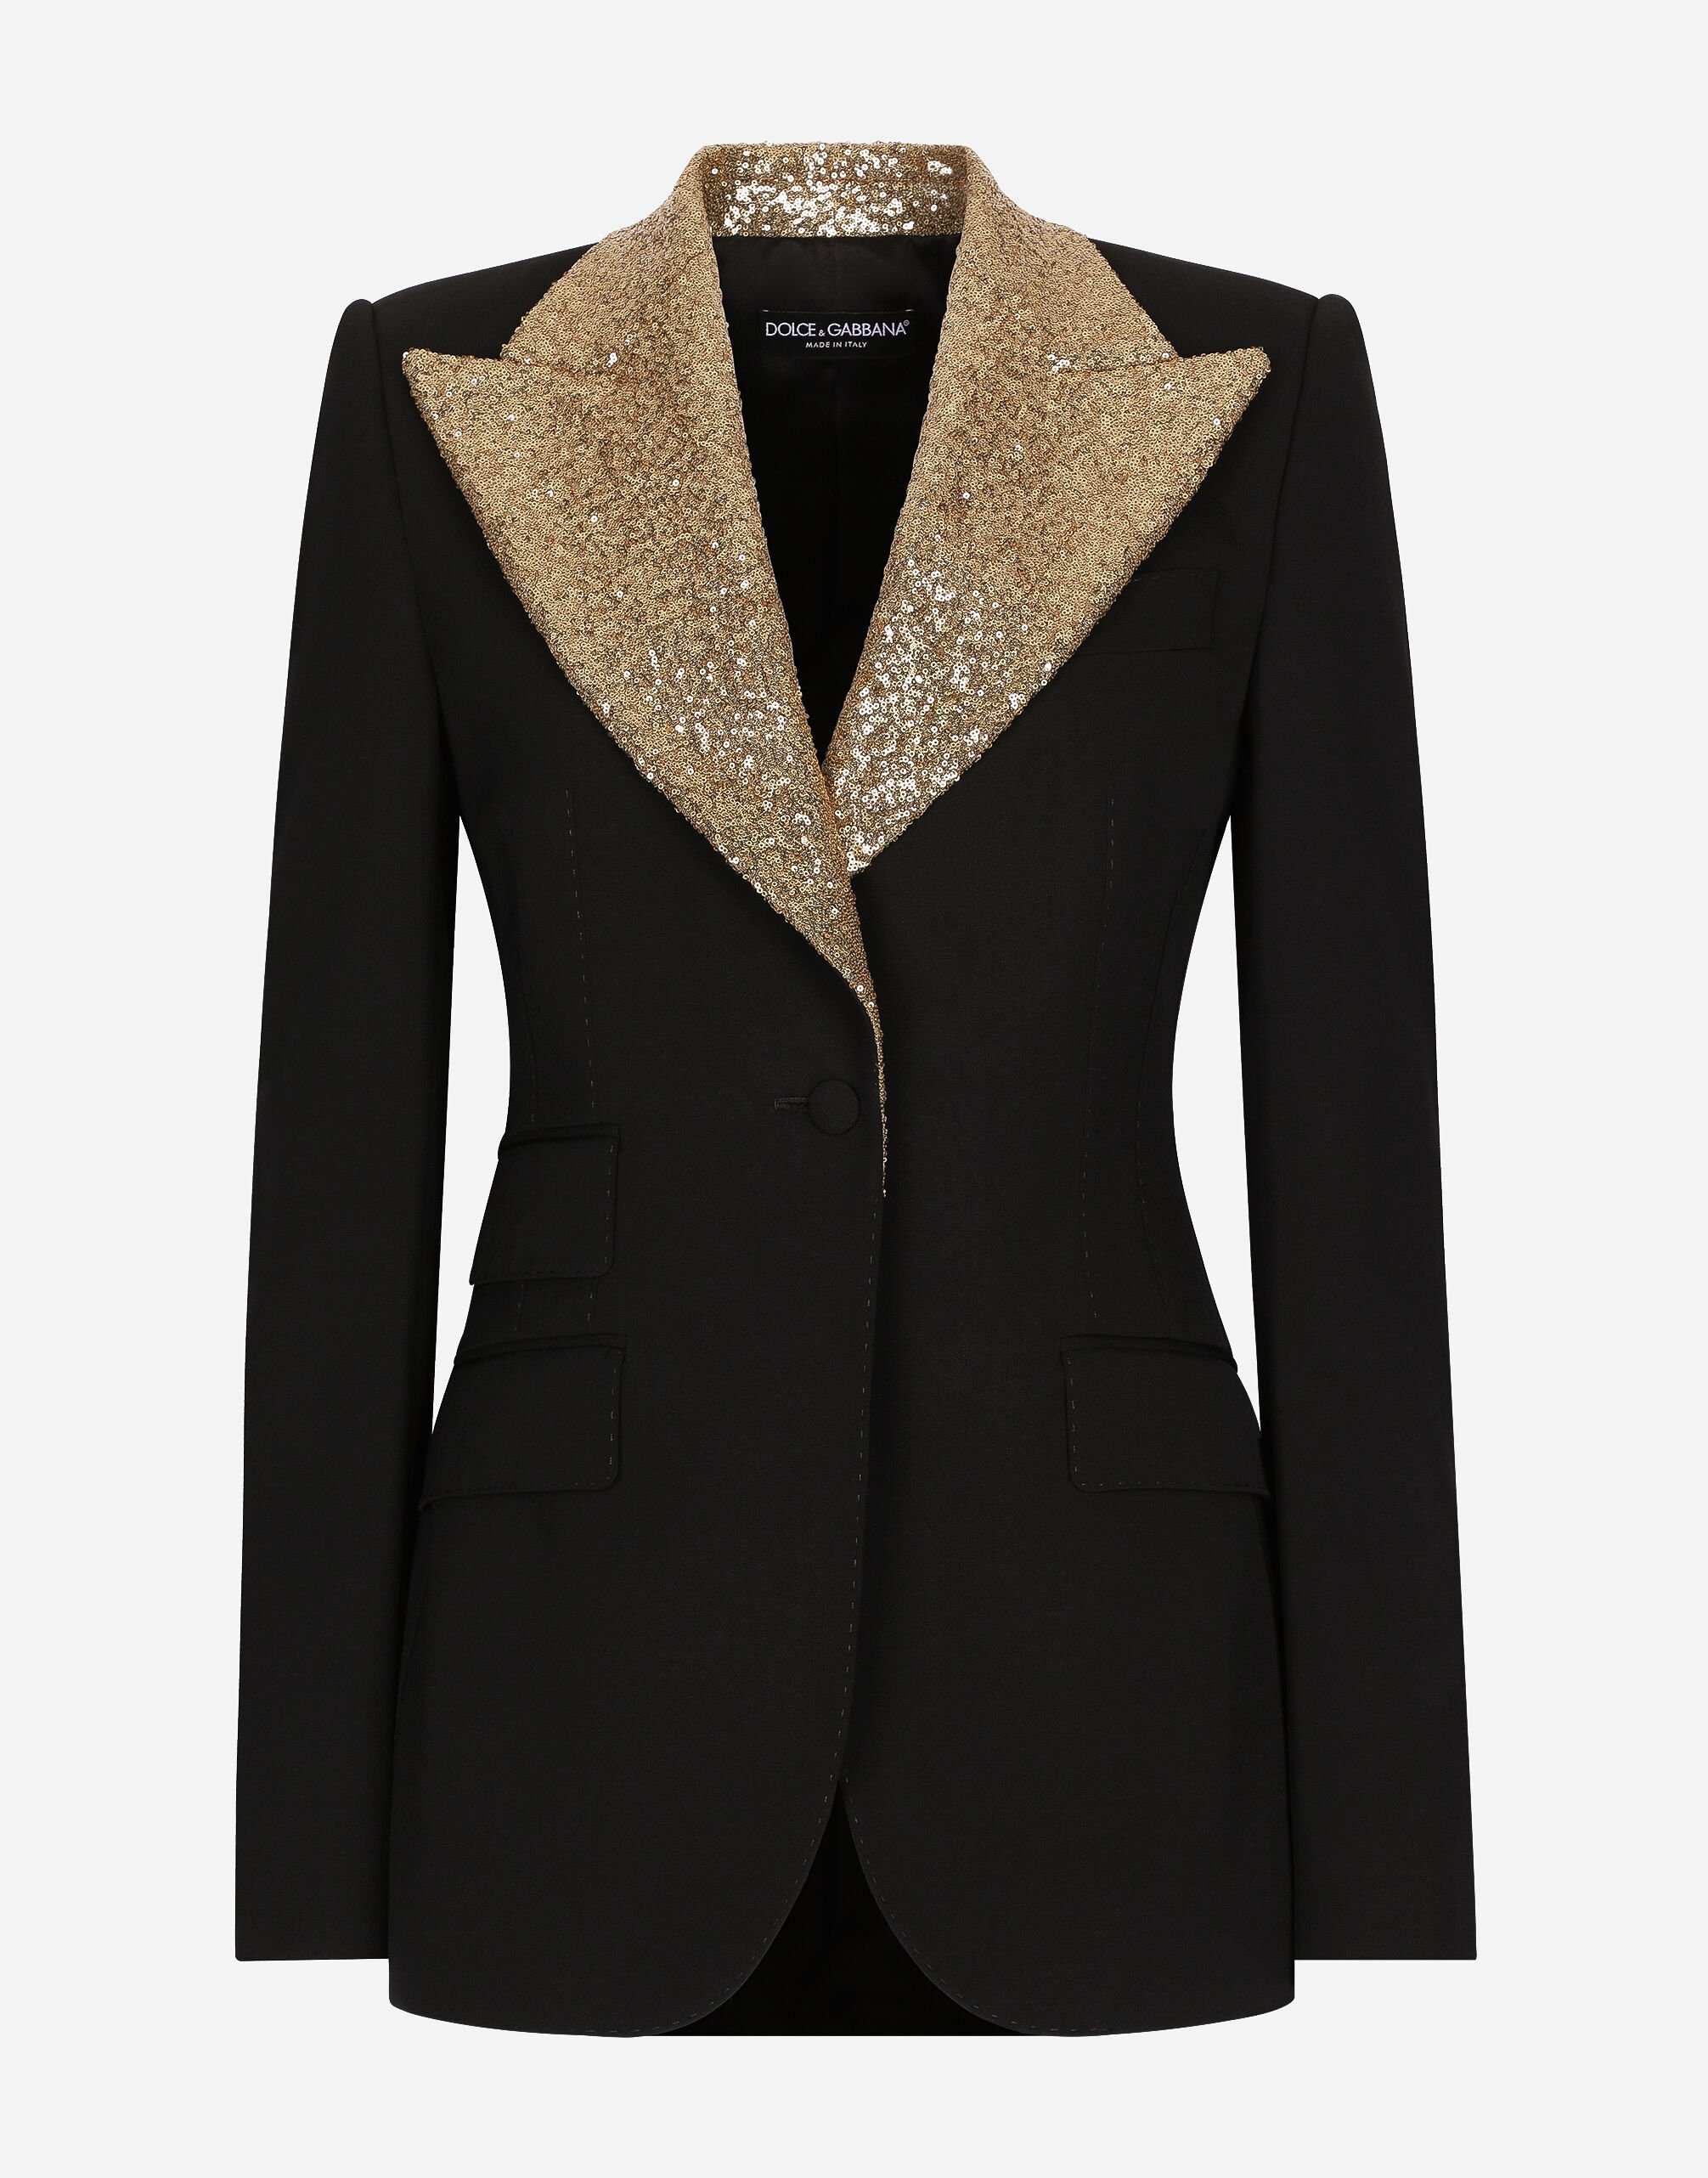 Dolce & Gabbana Single-breasted wool Turlington jacket with sequined lapels Gold BB7544AY828